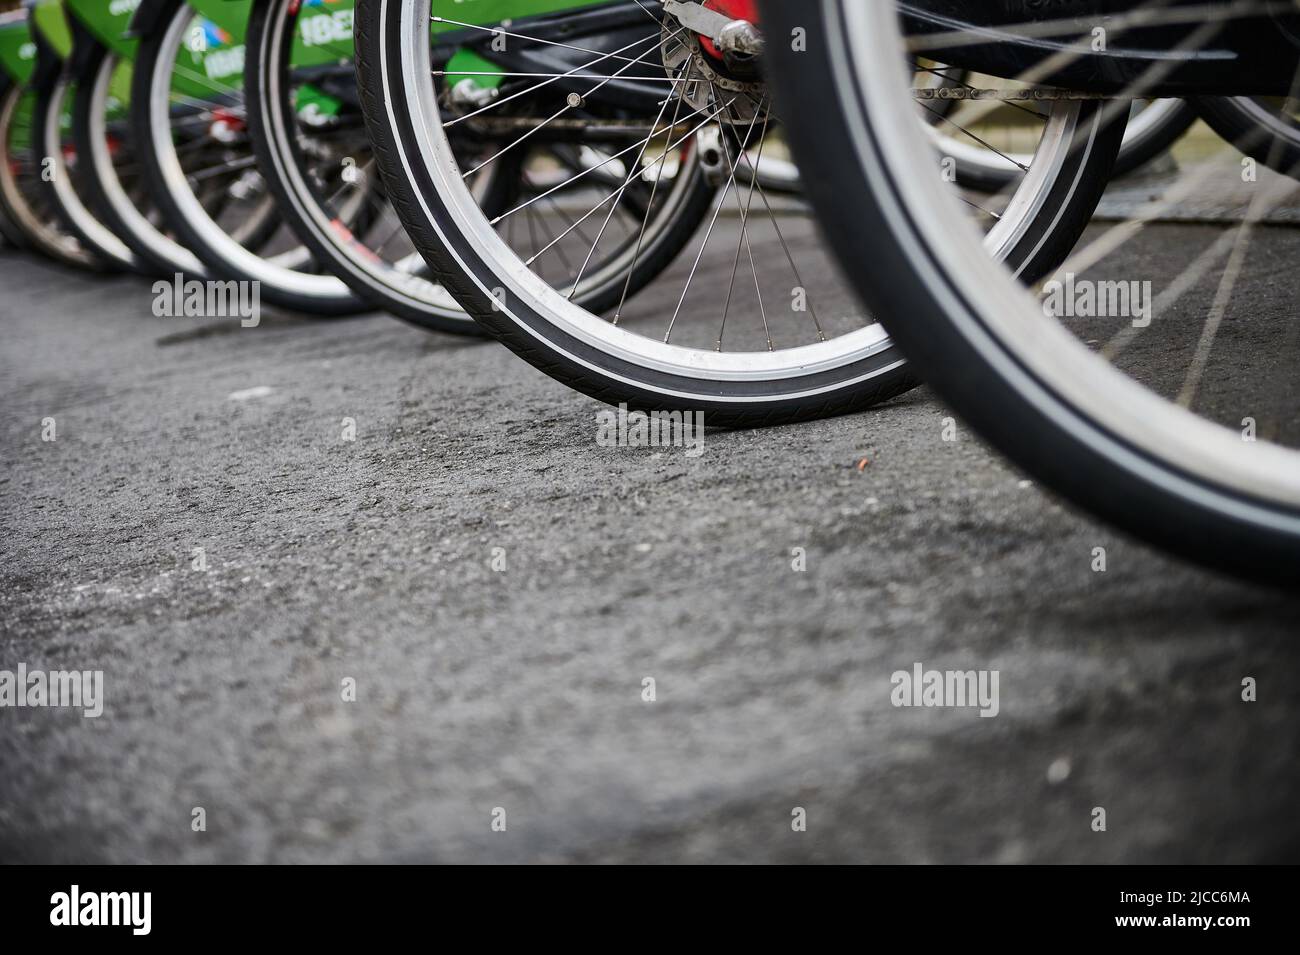 Bike Bicycle Parking In Bilbao, Biscay, Basque Country, Euskadi, Stock Photo